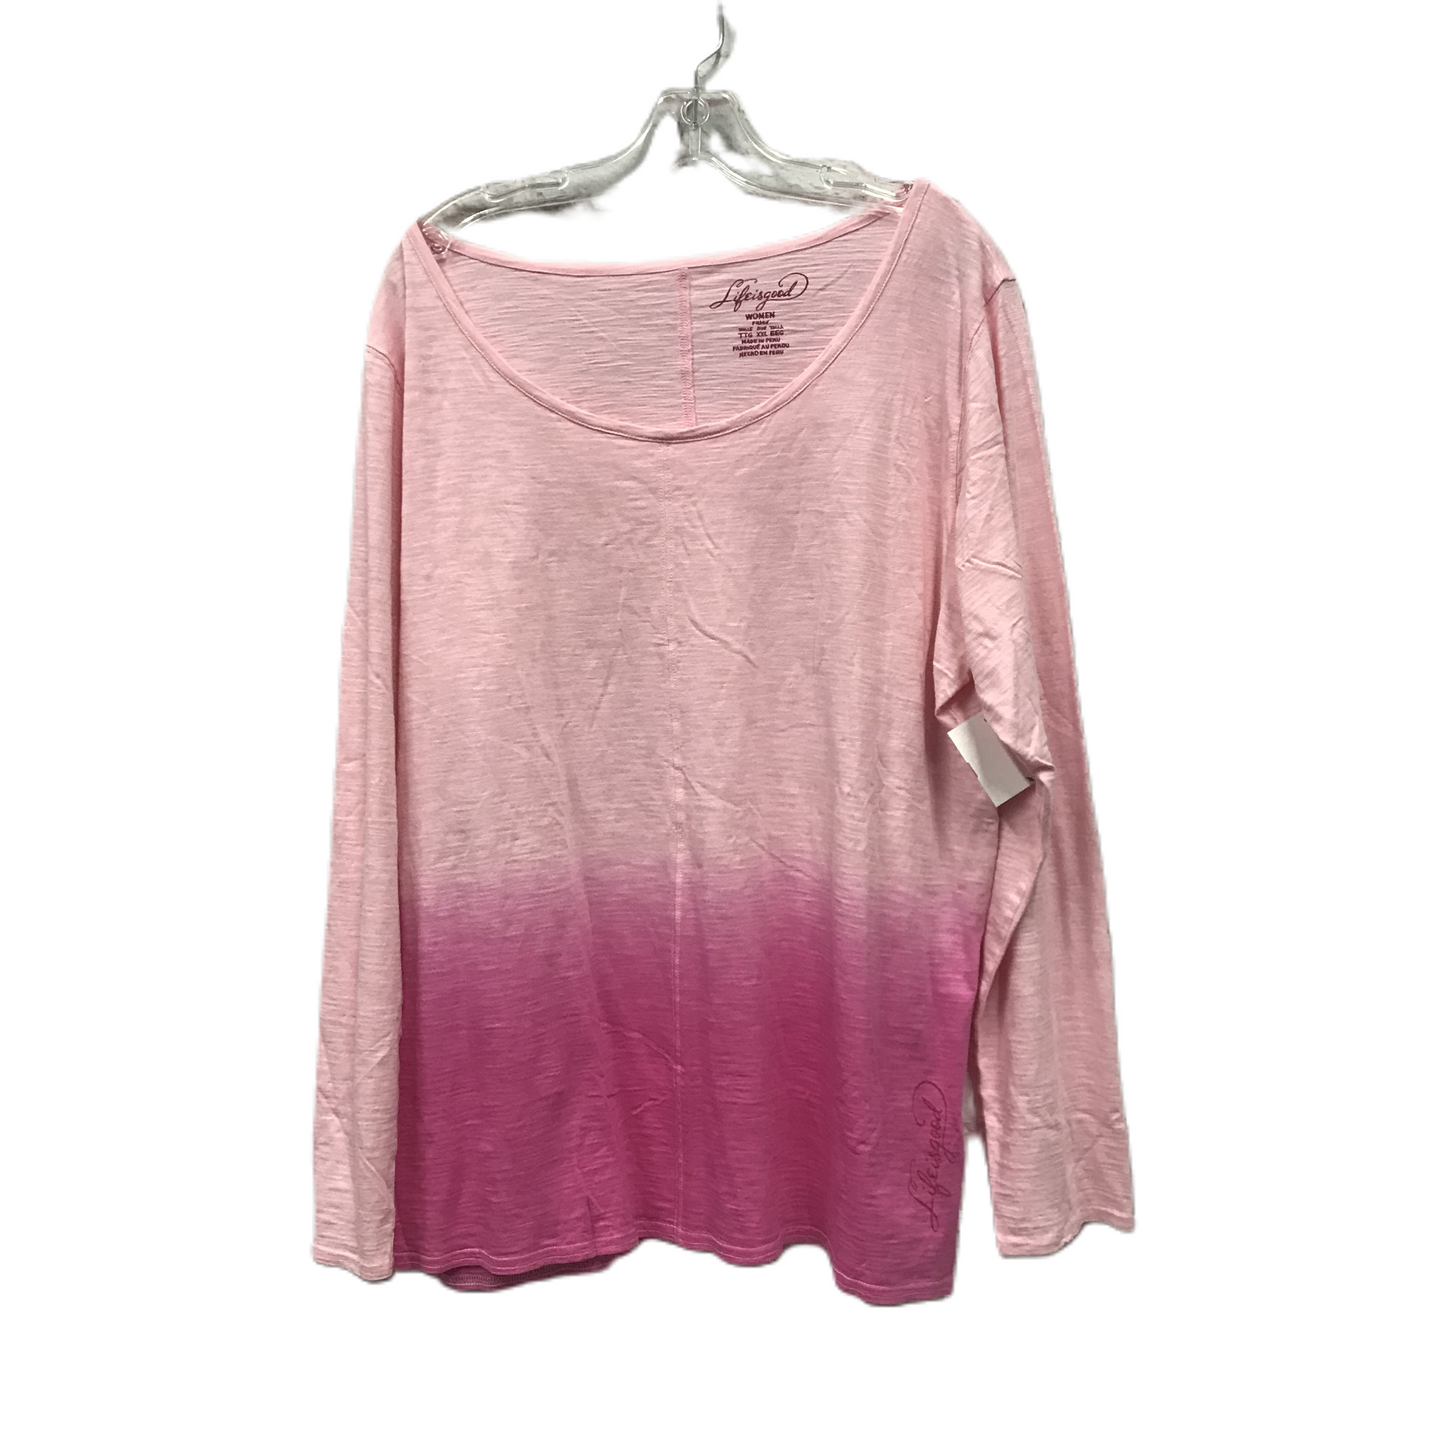 Pink Athletic Top Long Sleeve Crewneck By Life Is Good, Size: Xxl